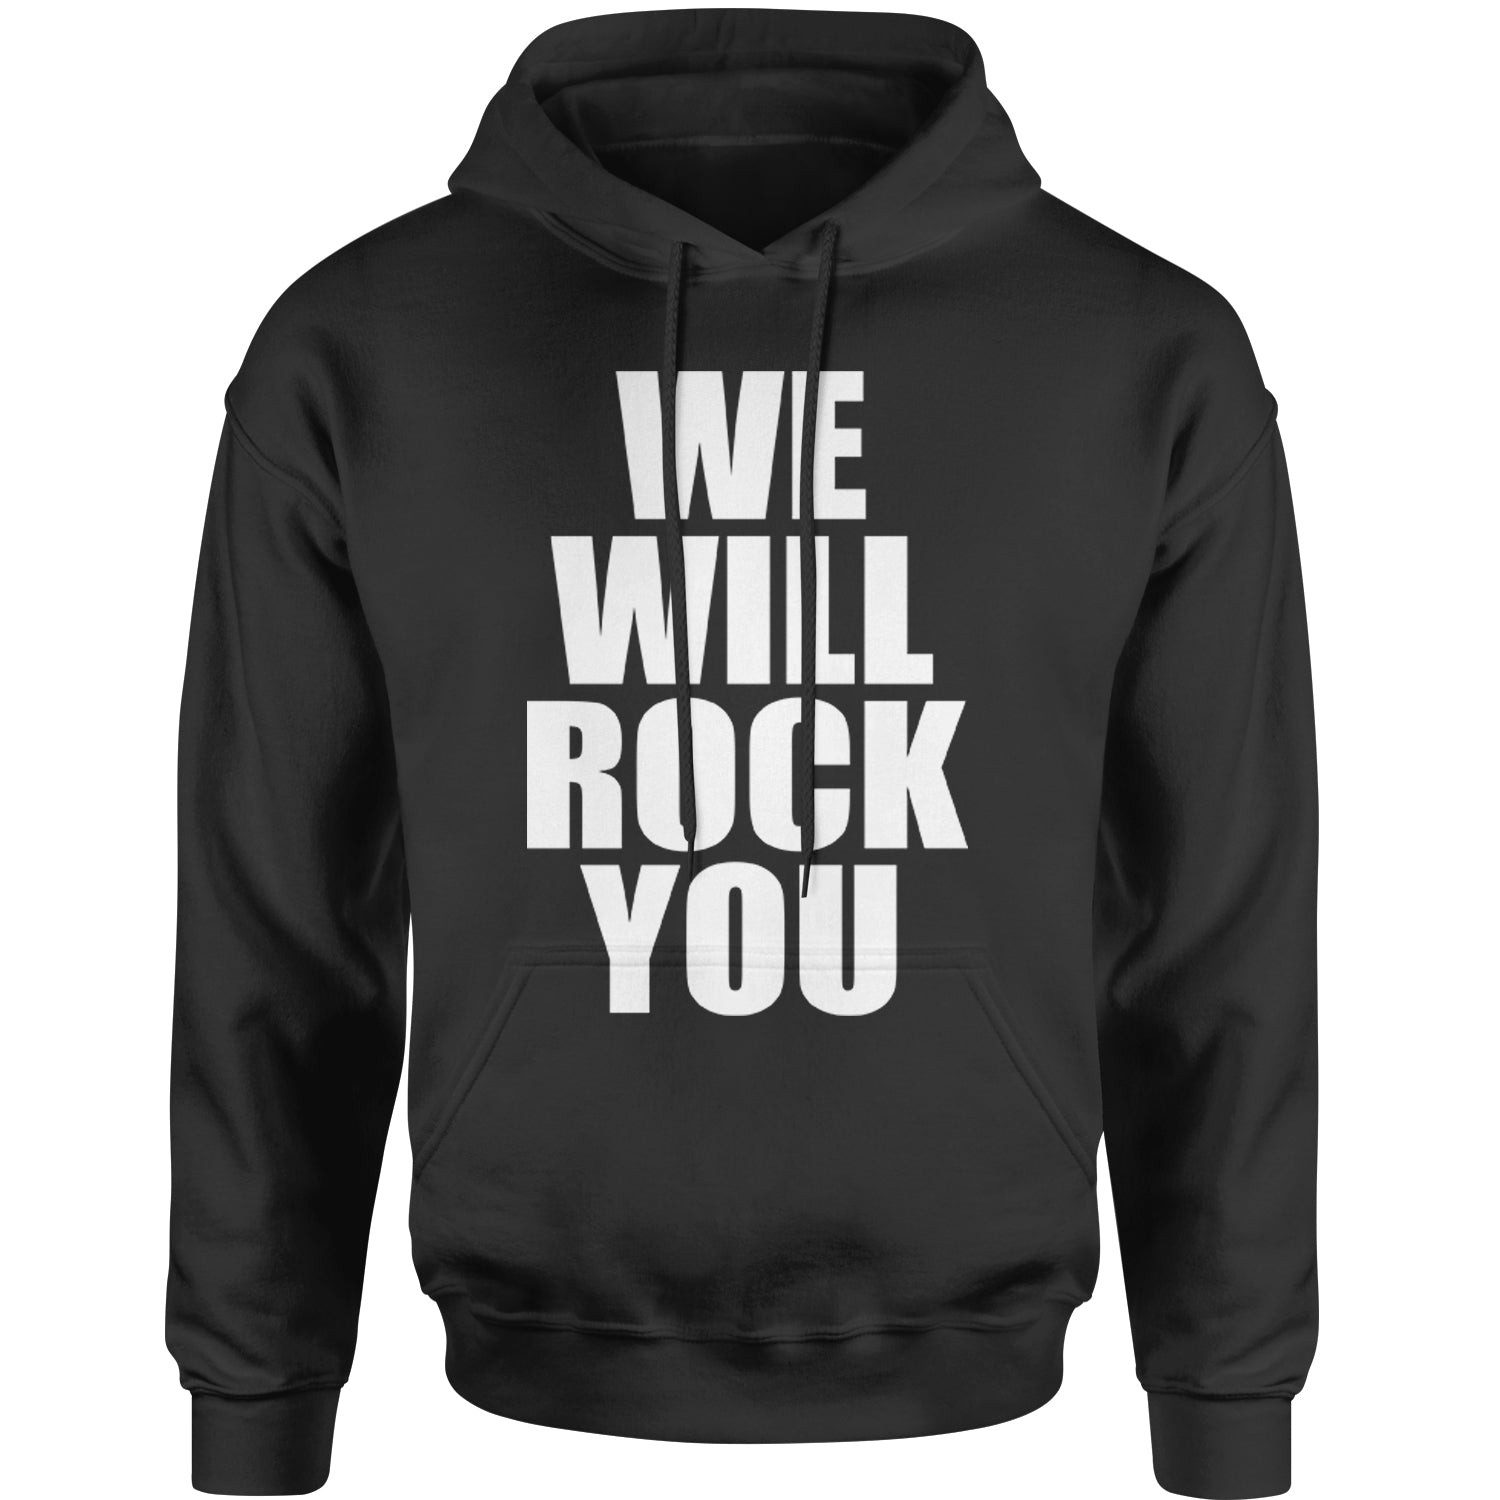 We Will Rock You Adult Hoodie Sweatshirt #expressiontees by Expression Tees